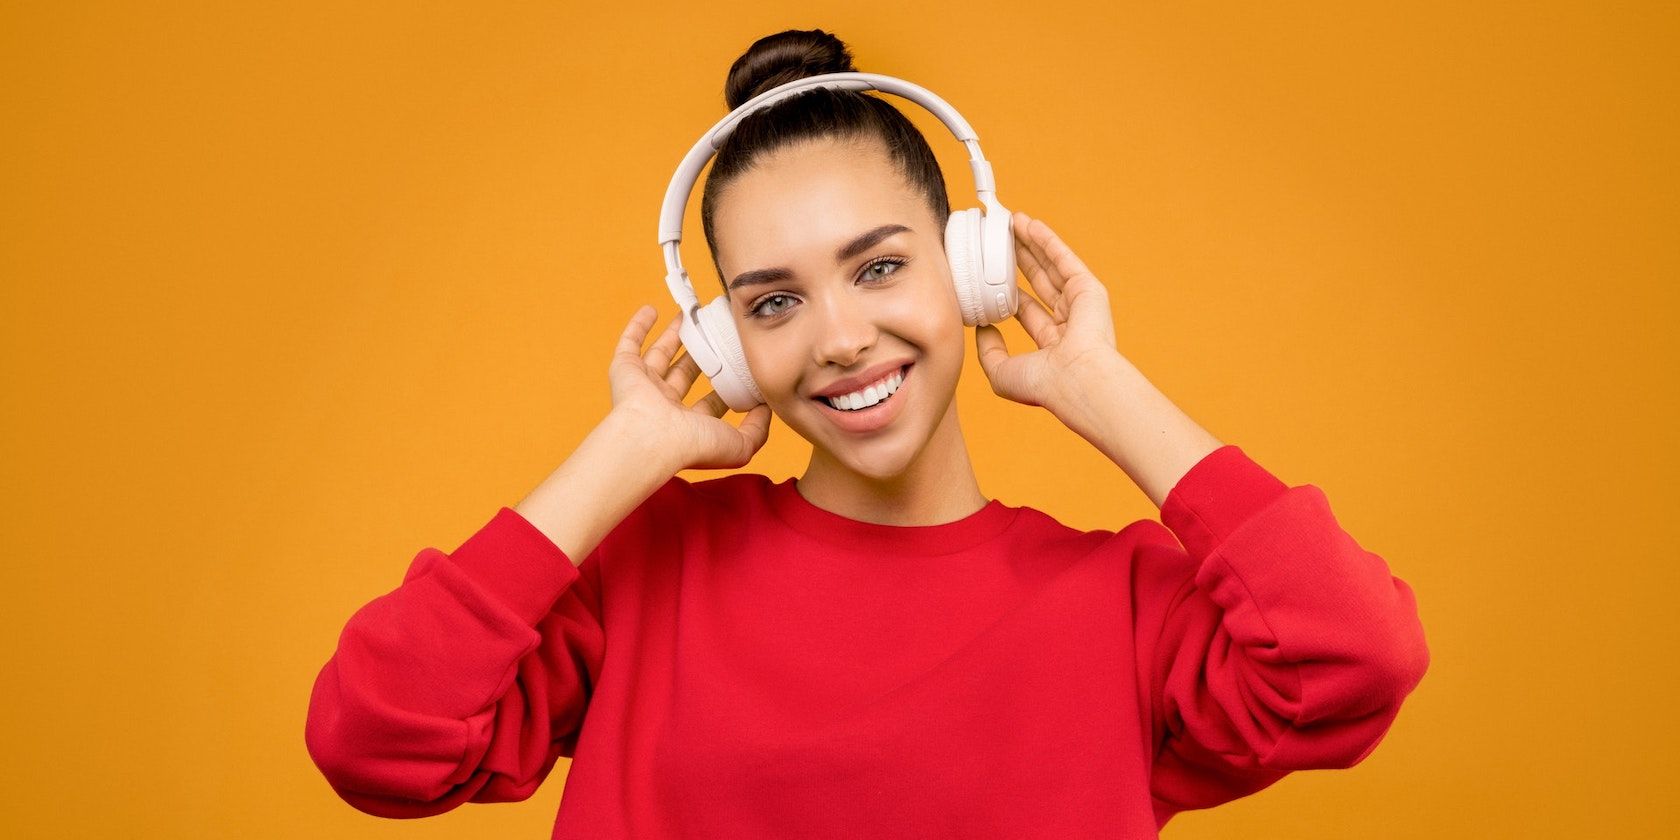 A woman wearing headphones against an orange background